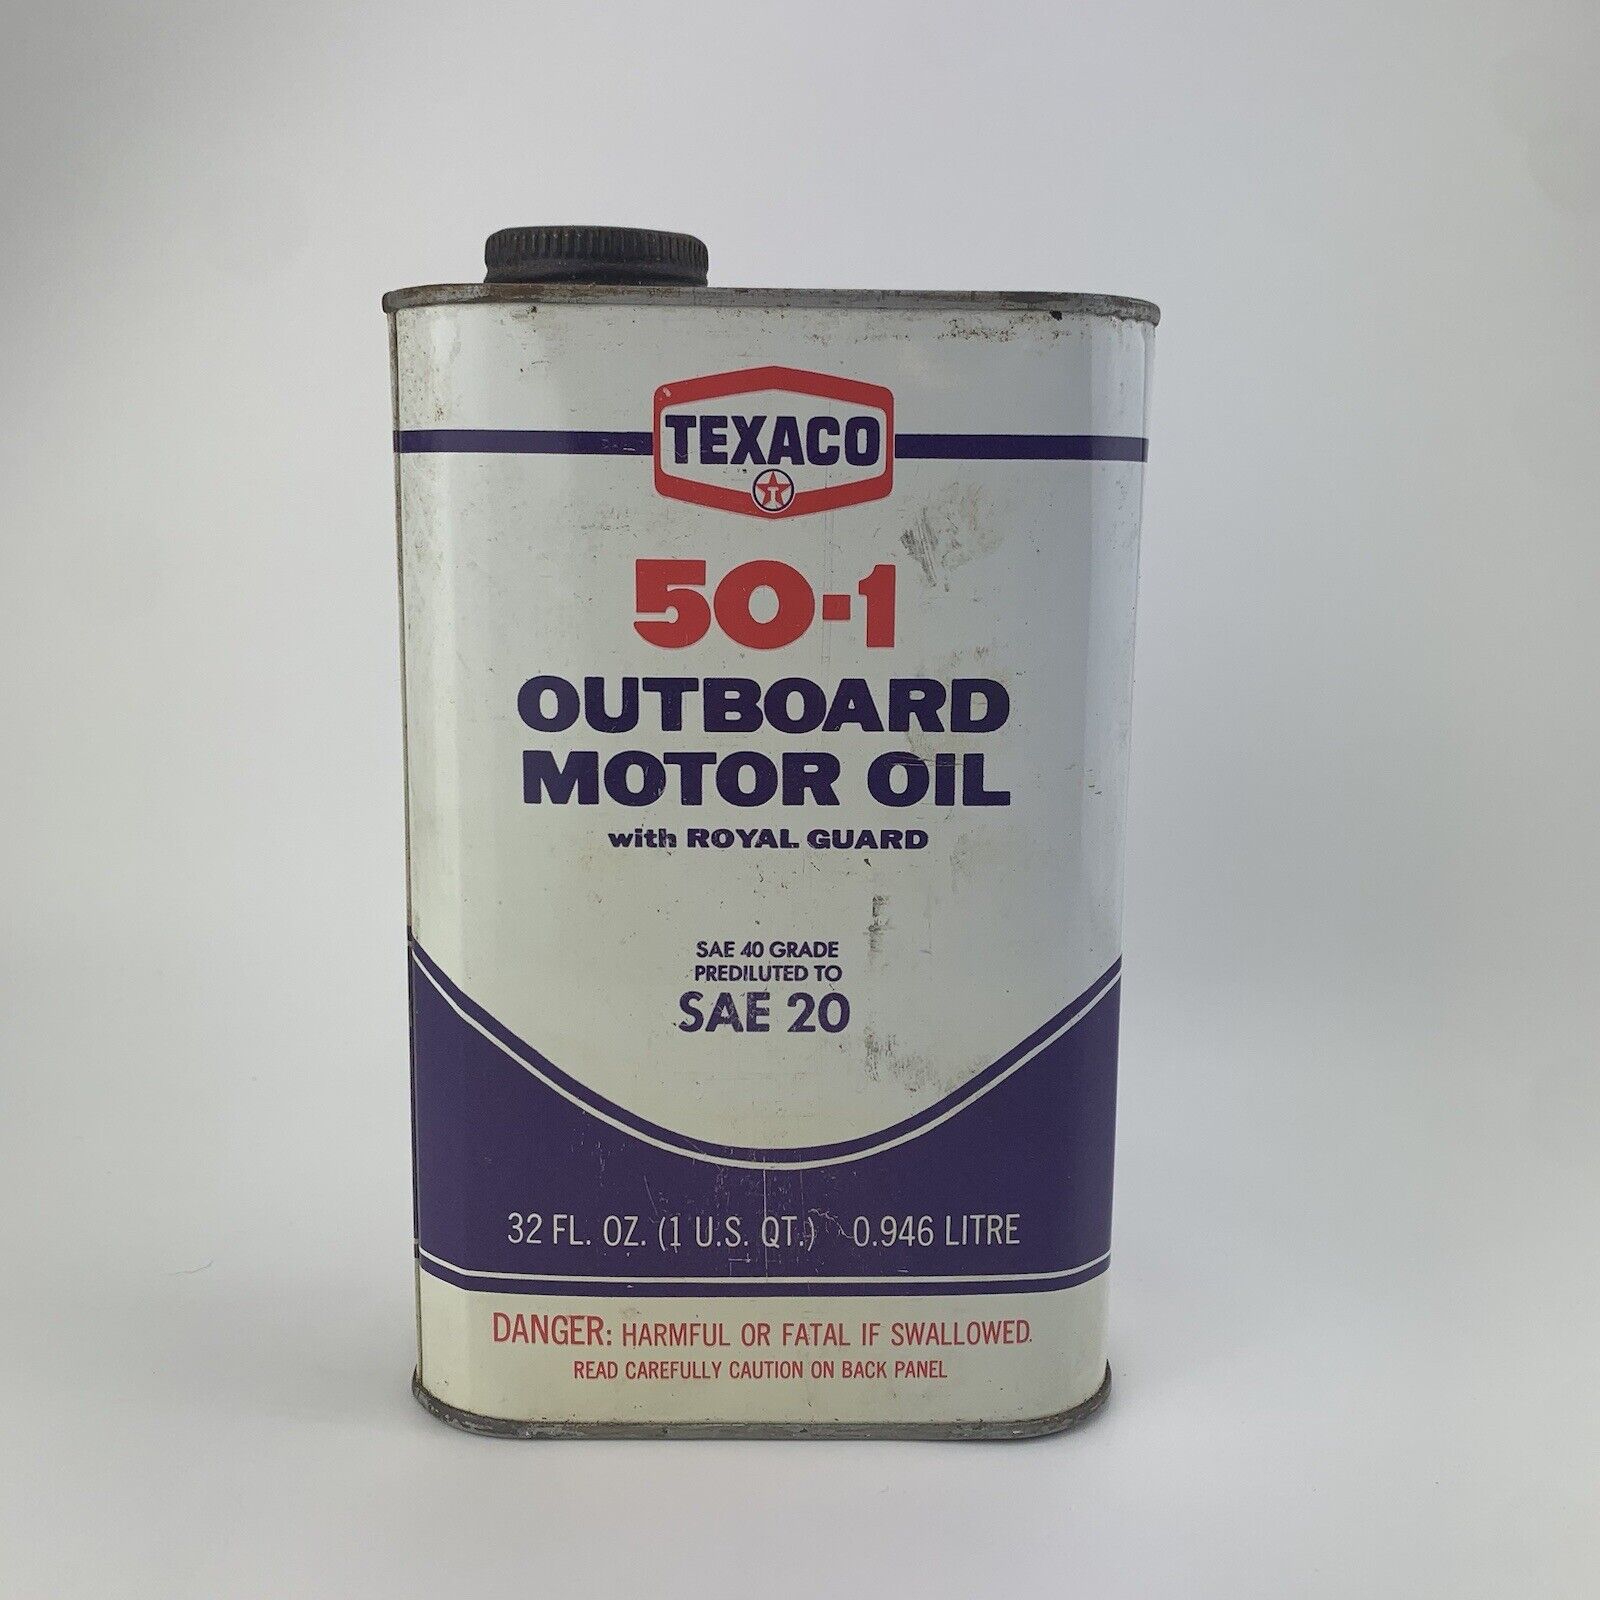 Vintage 1973 TEXACO Outboard Motor OIL CAN empty